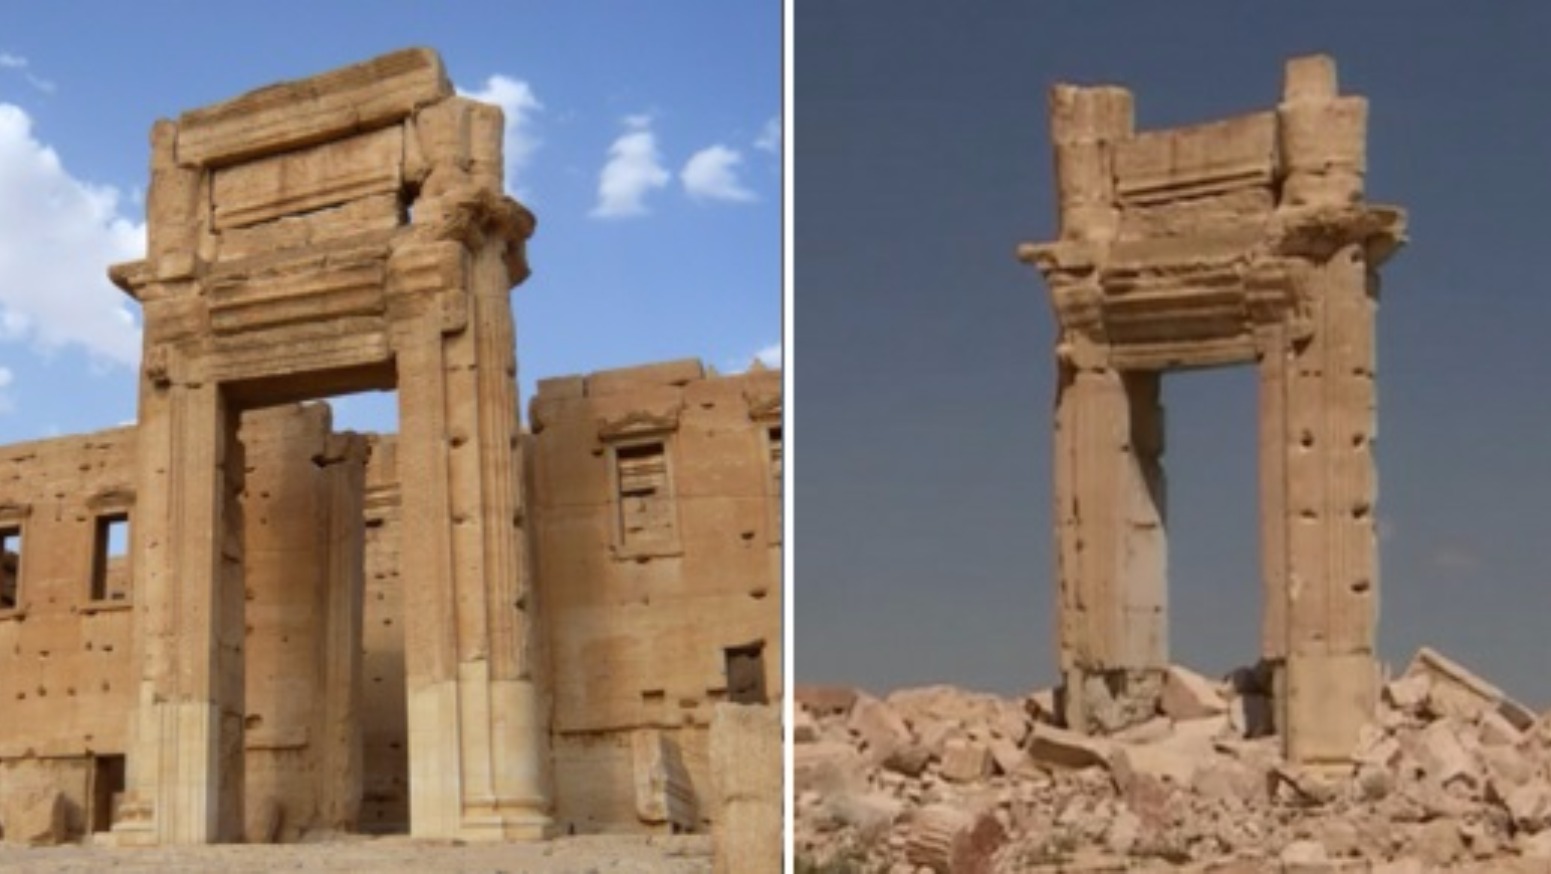 palmyra-before-and-after-photos-reveal-level-of-islamic-state